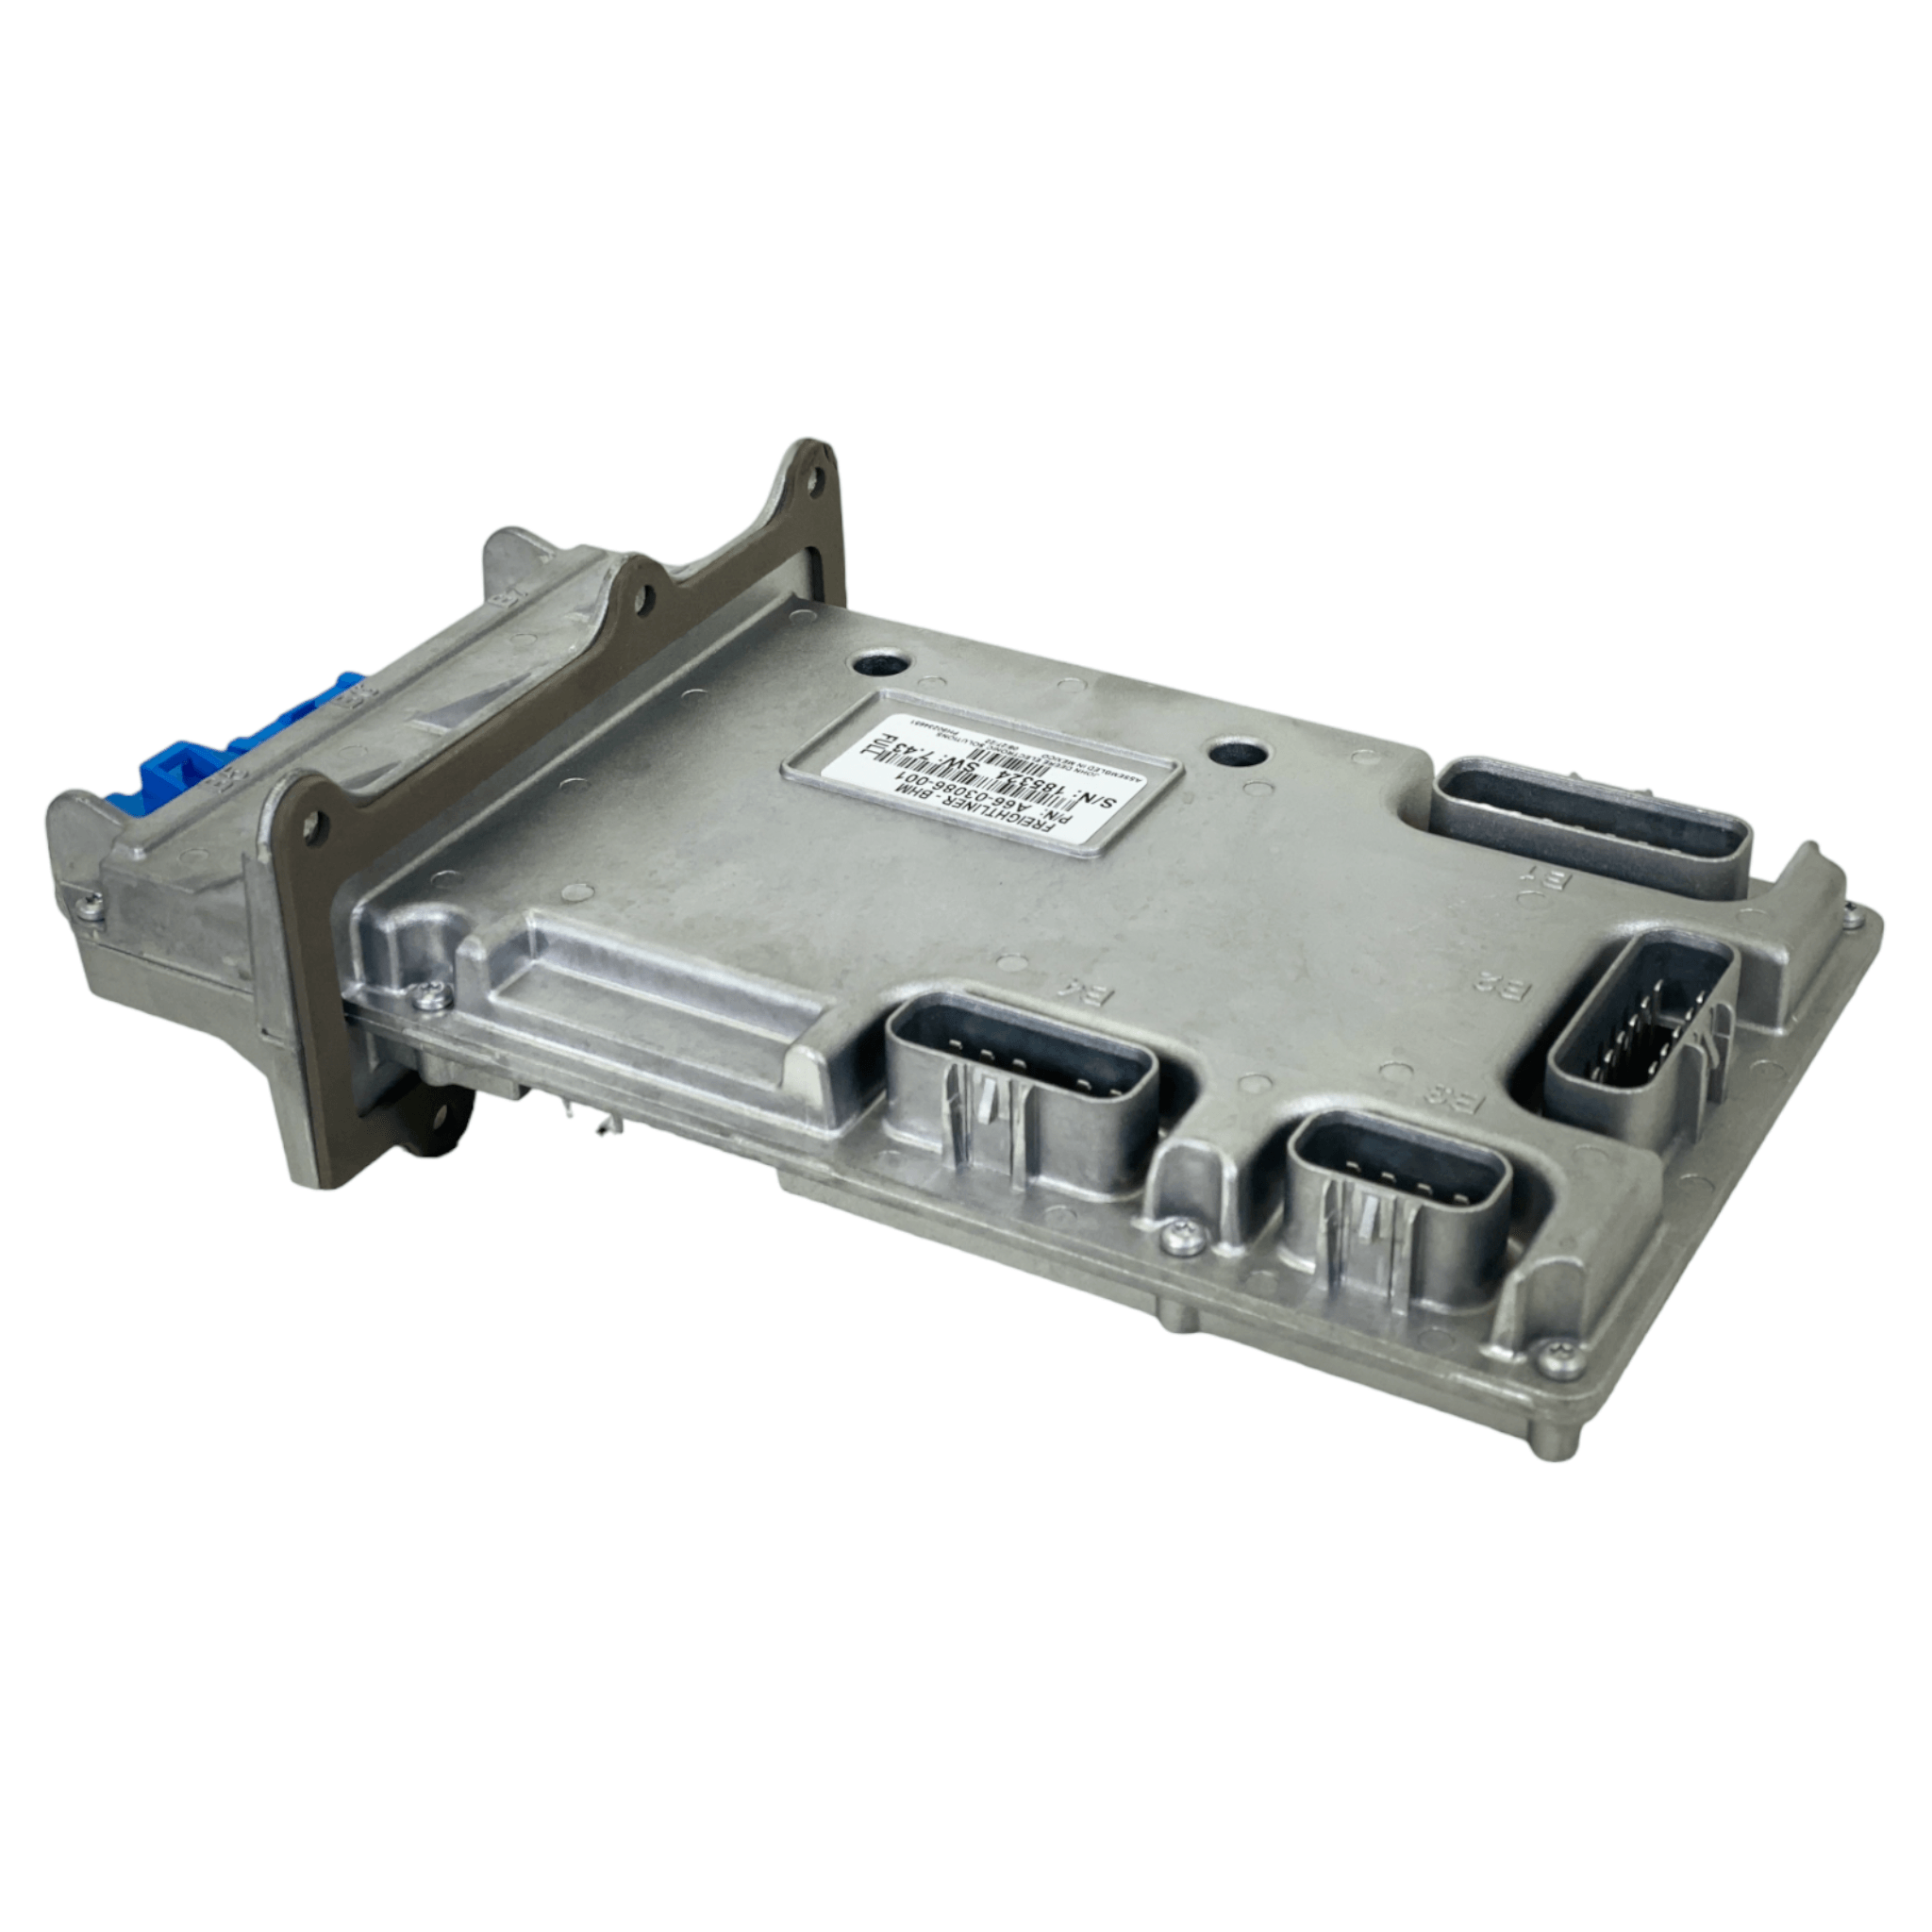 A66-03086-001 Genuine Freightliner Module-Bh For Freightliner M2 - ADVANCED TRUCK PARTS